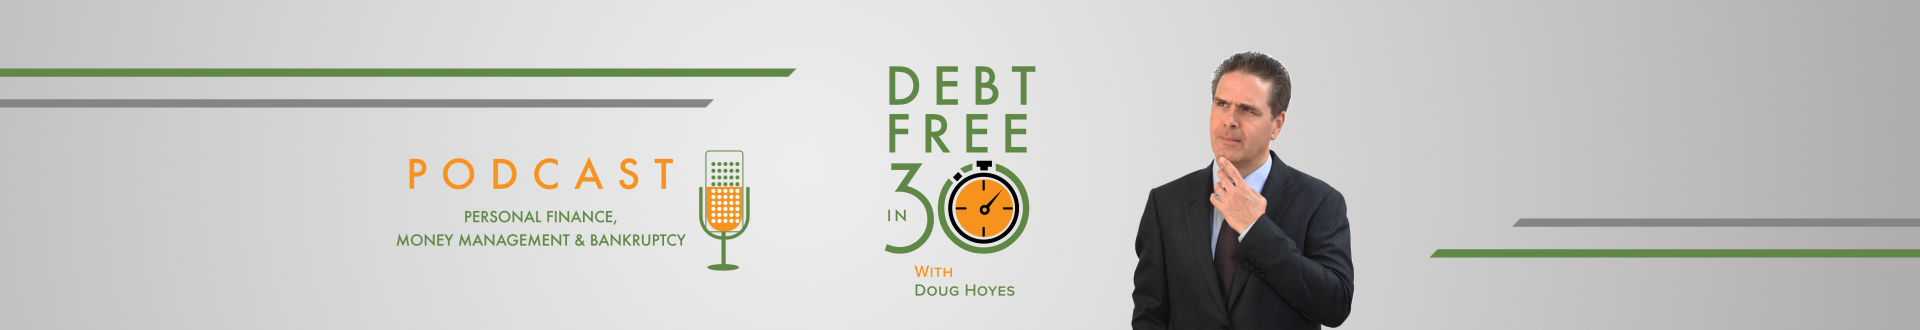 Debt Free in 30 Podcast Archive - Page 21